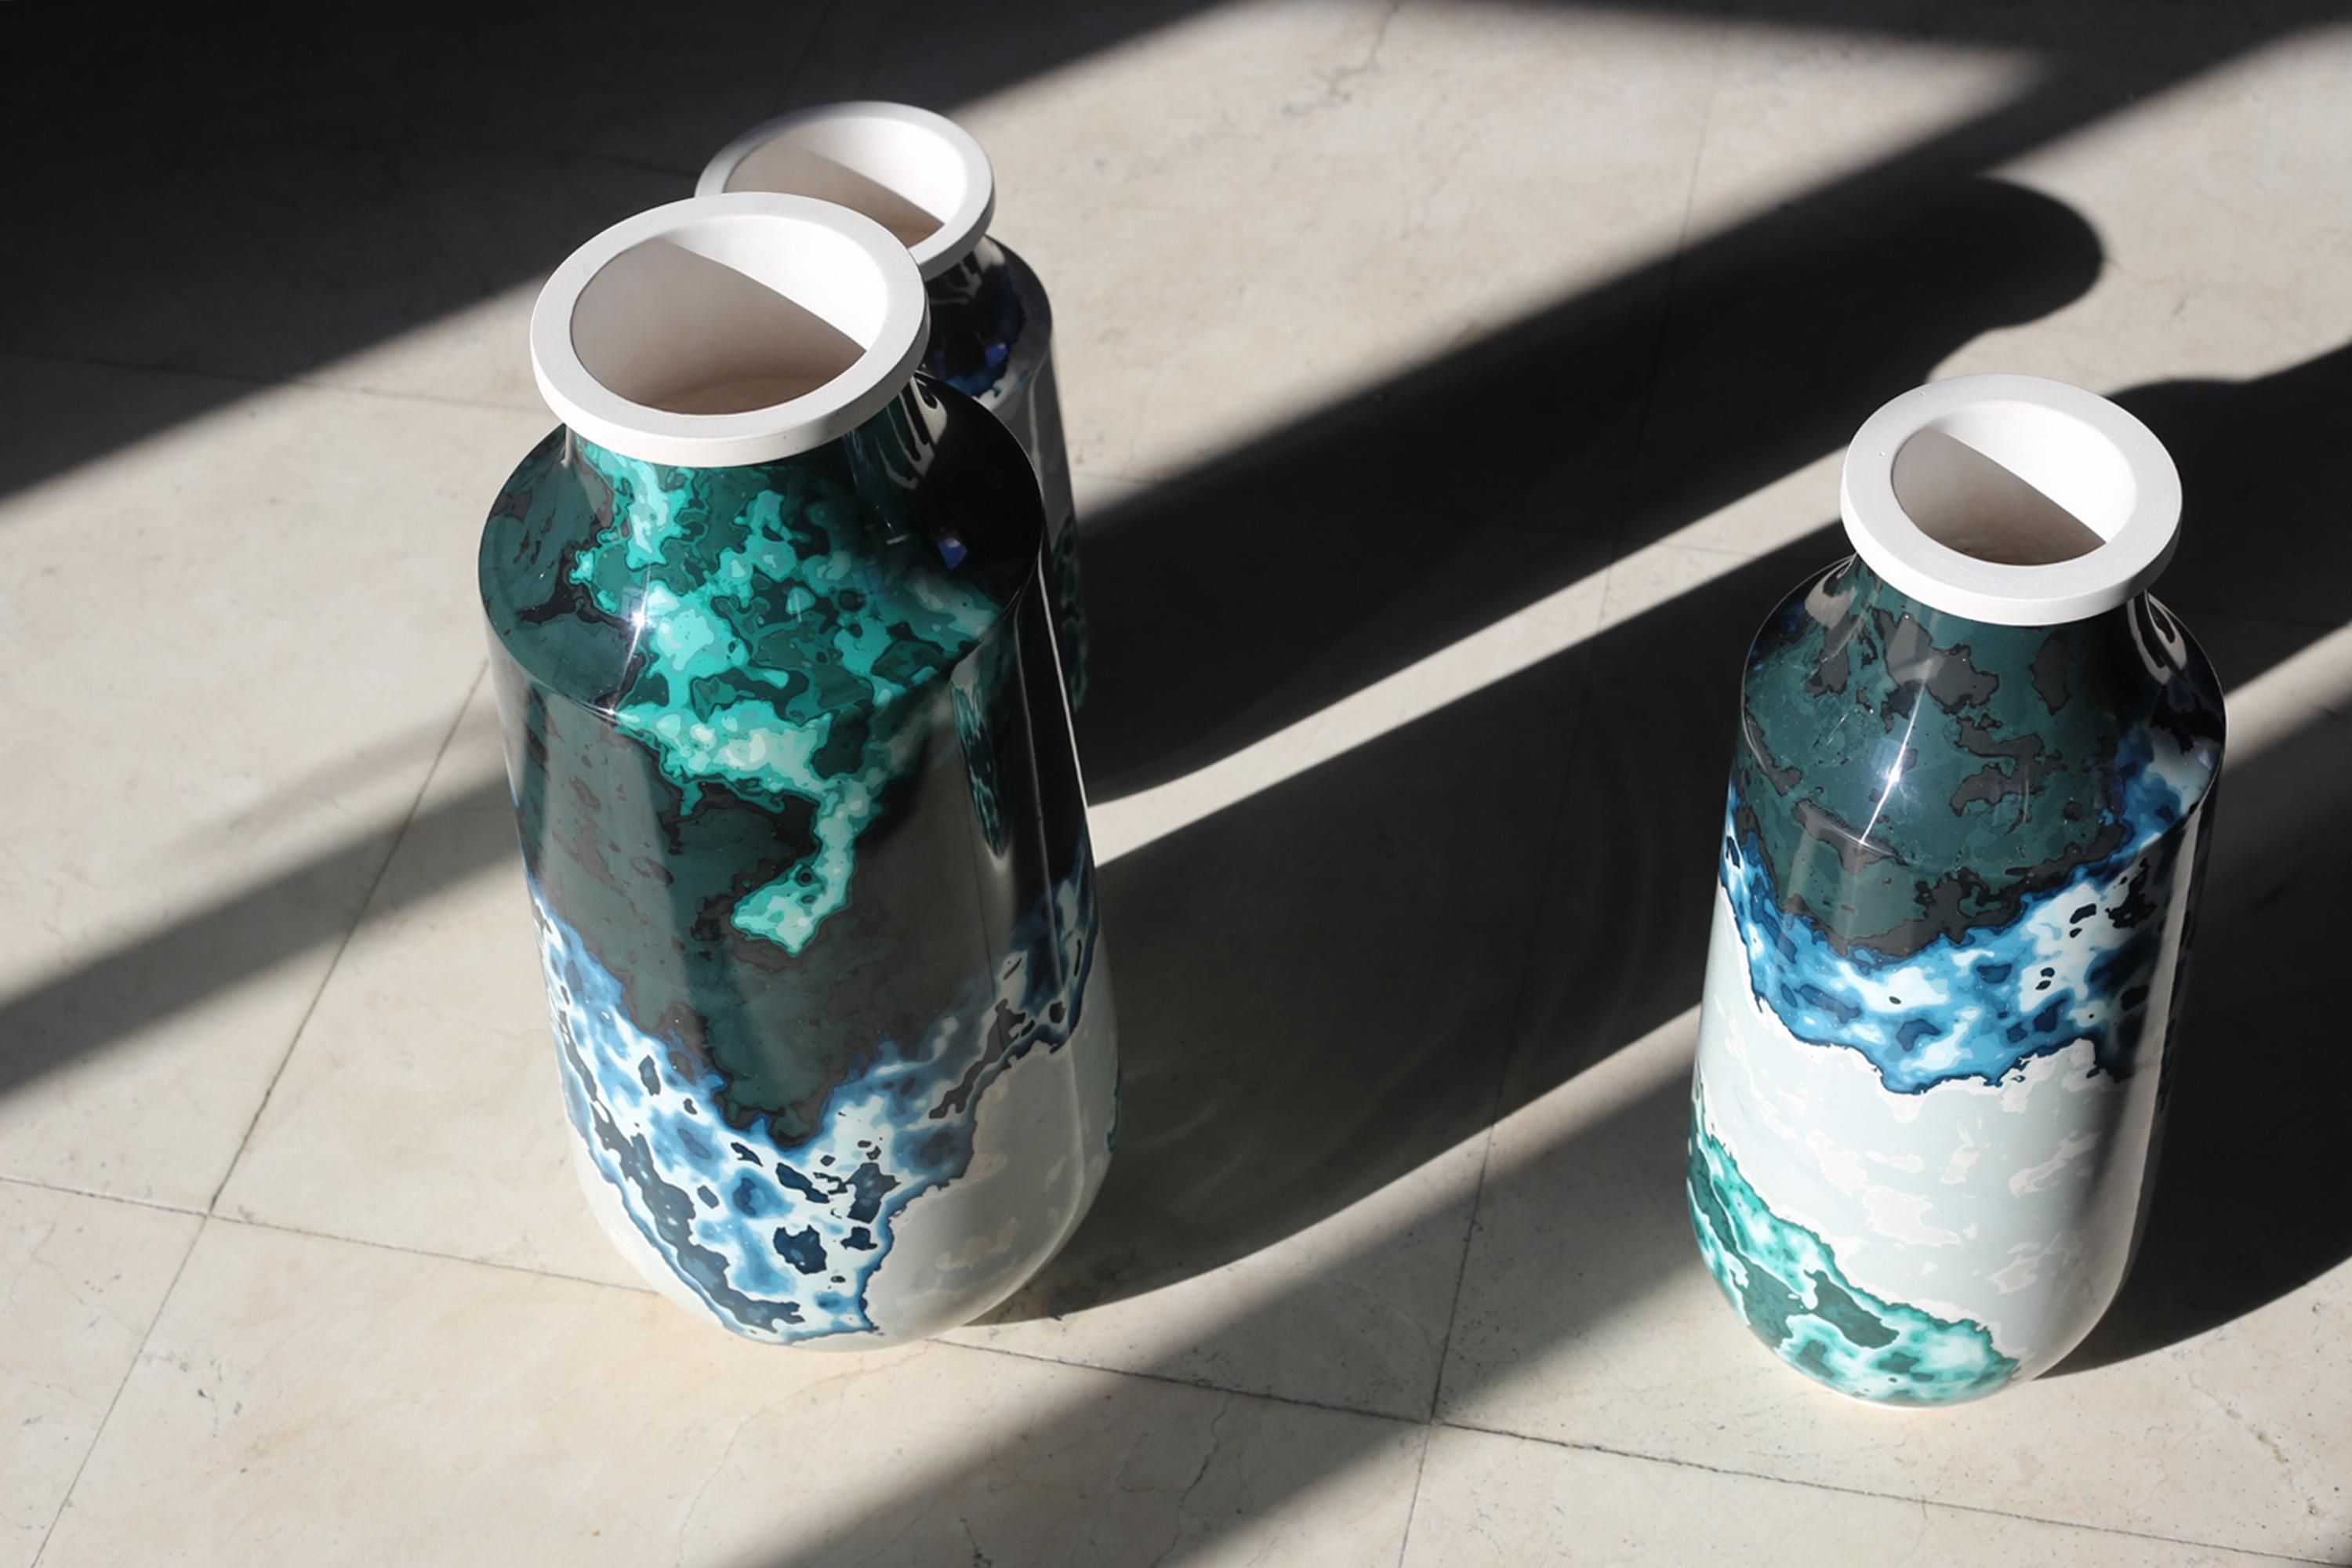 Cast Cloud Stone, Set of 3Contemporary Vases / Vessels in Blue & Green by Nic Parnell For Sale